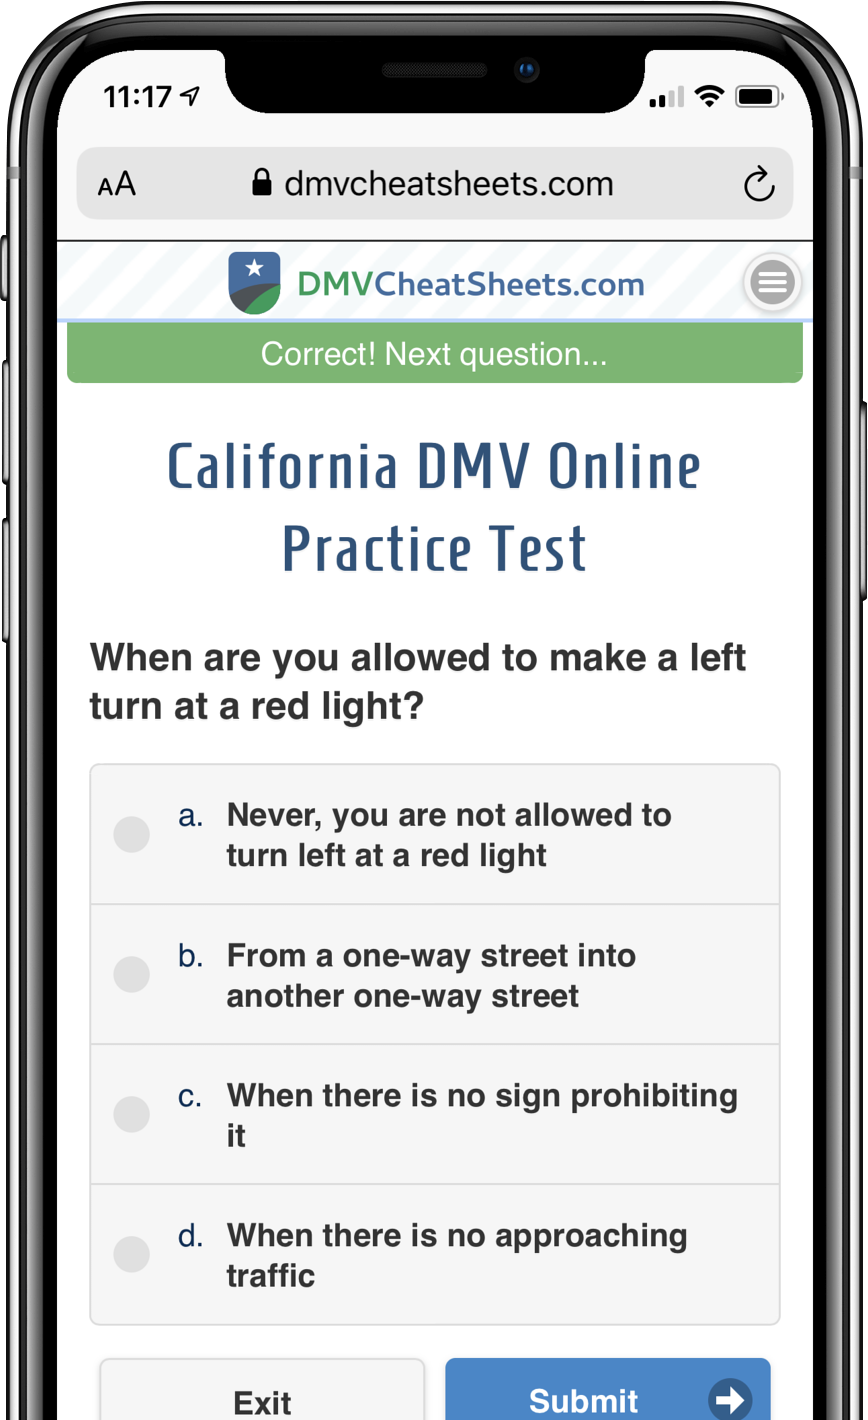 can you take the driver's license test online